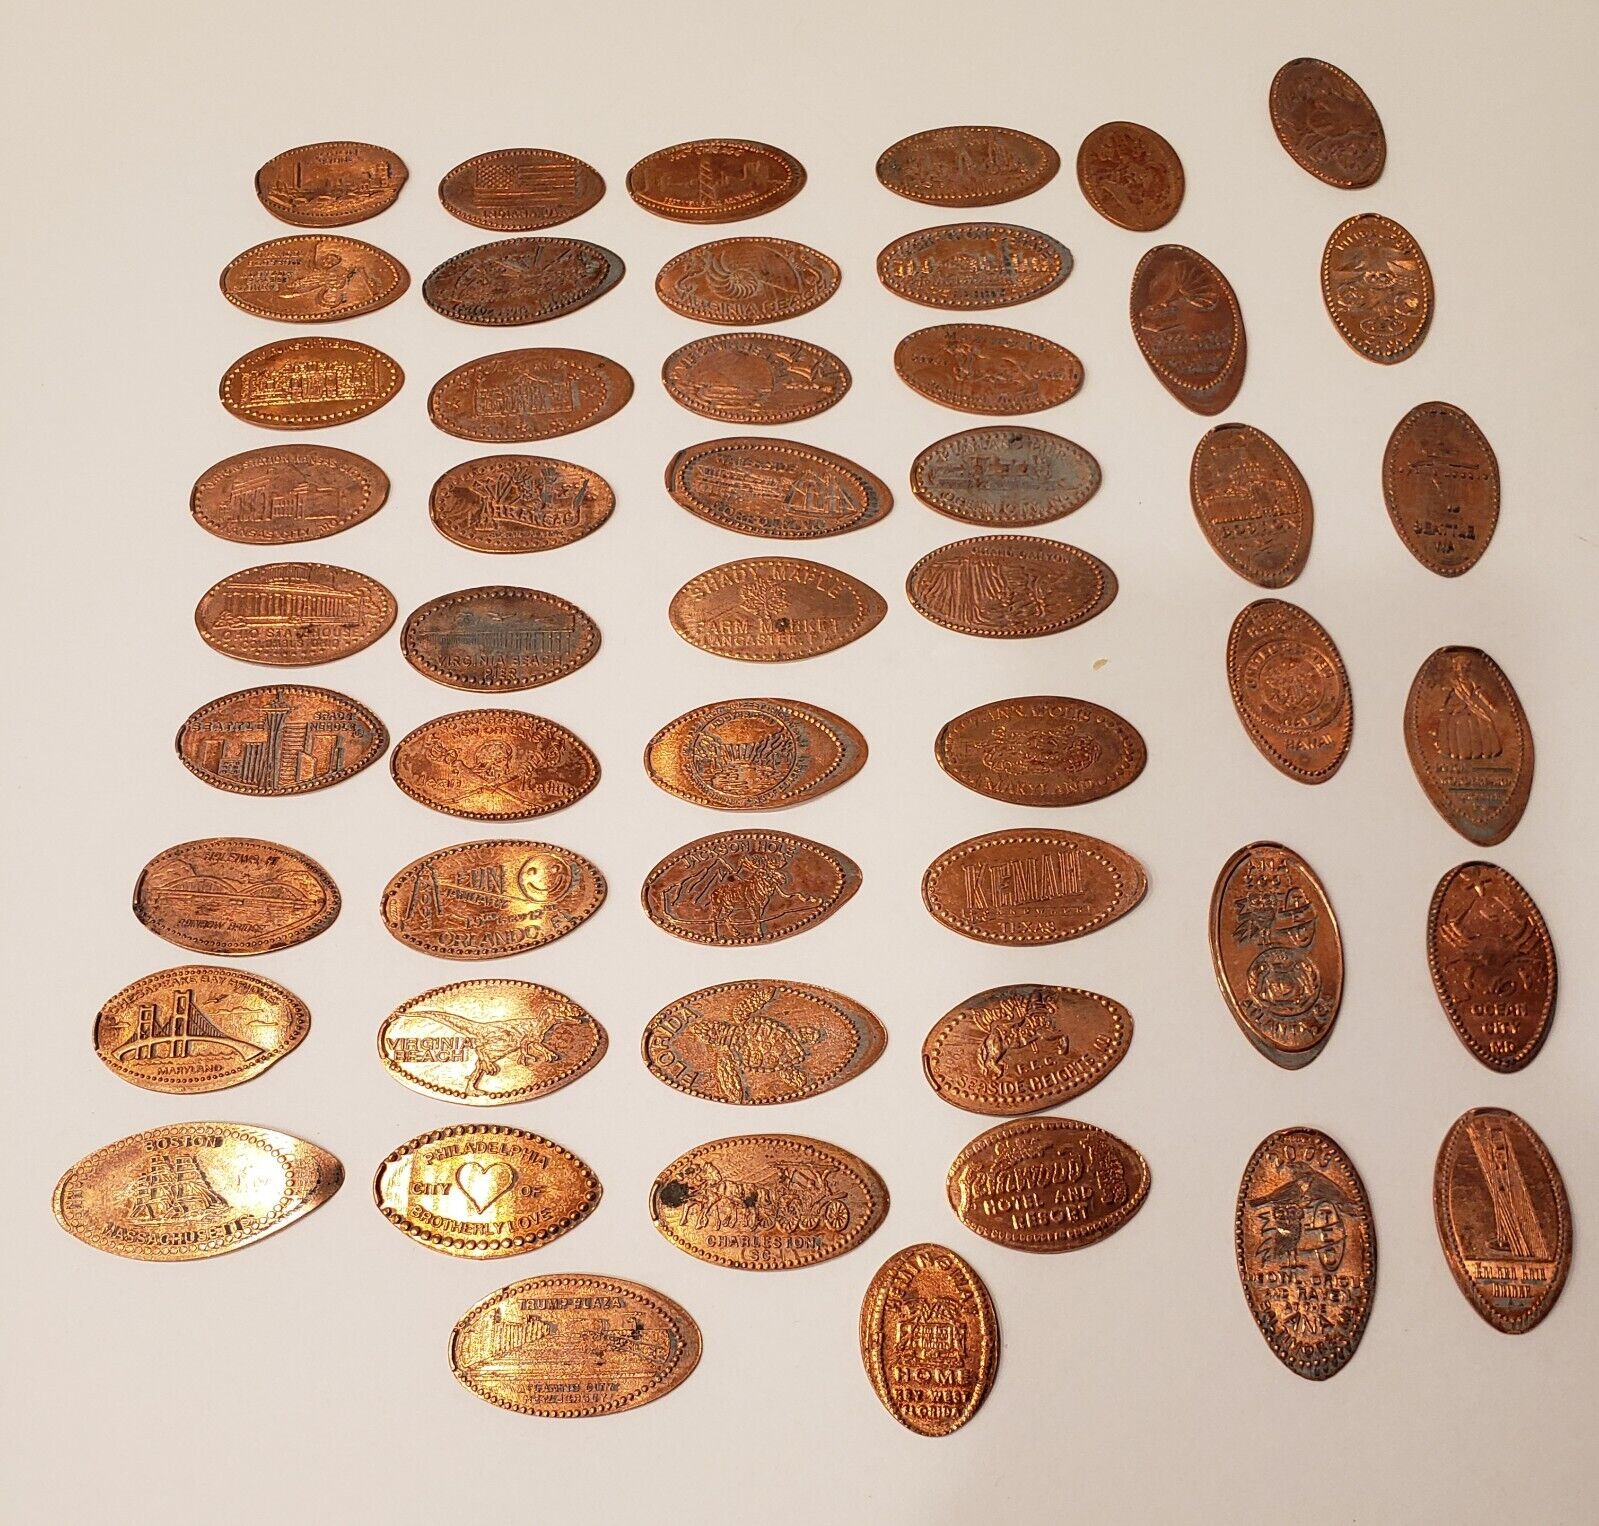 Souvenir Elongated Pressed Pennies US States & Places Sea to Shining Sea Trump